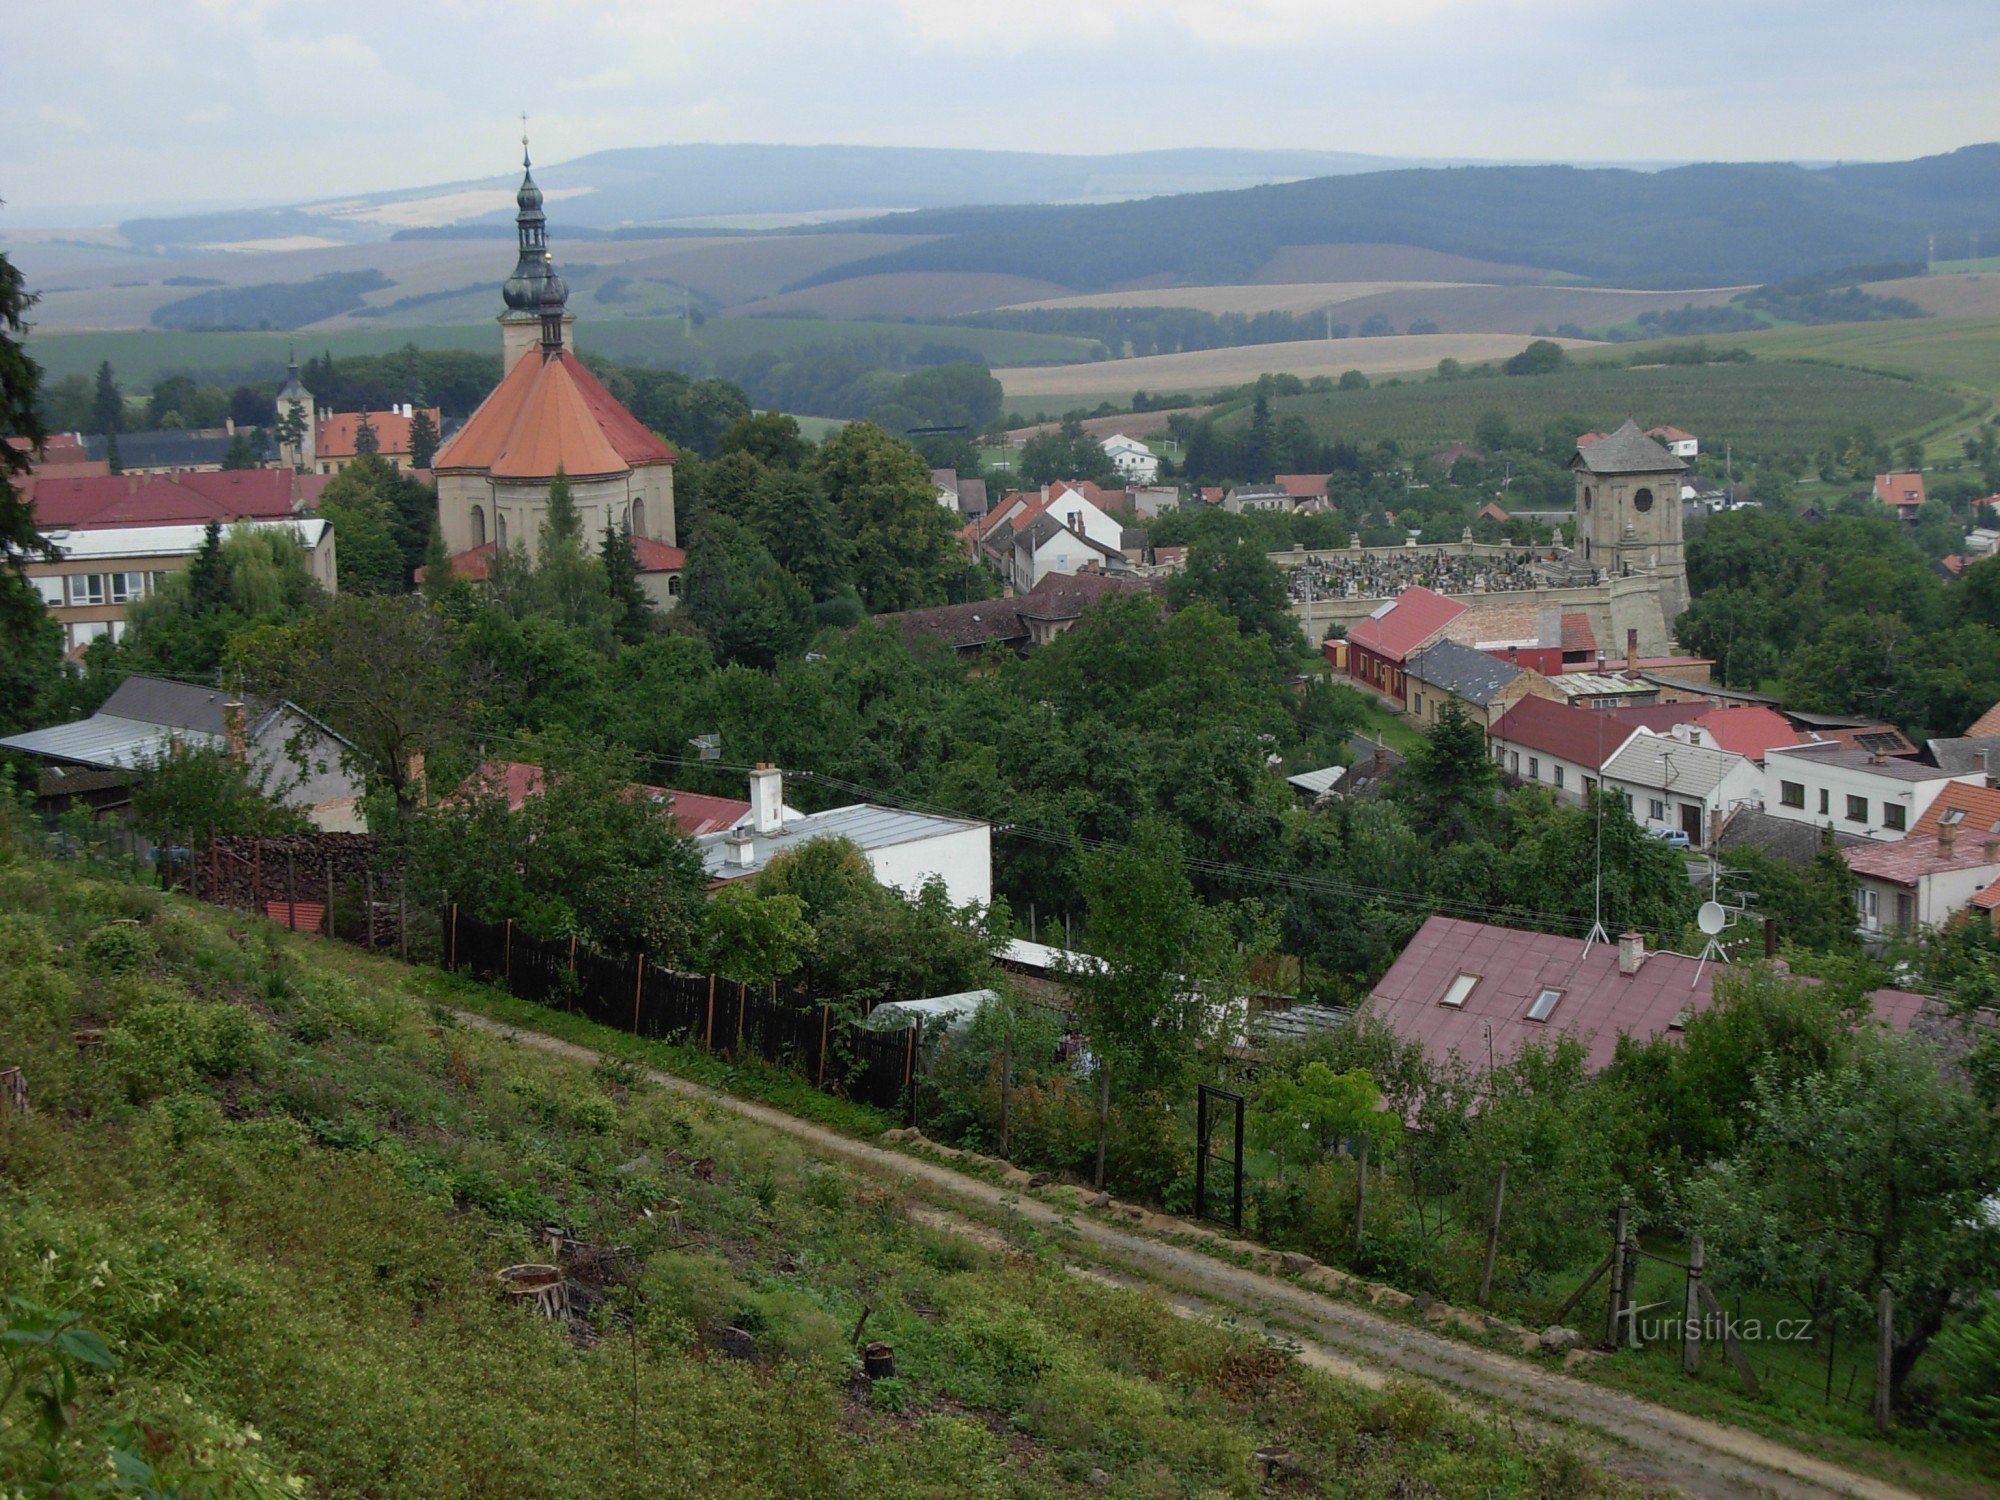 Obes Střílky with a visible cemetery and chapel